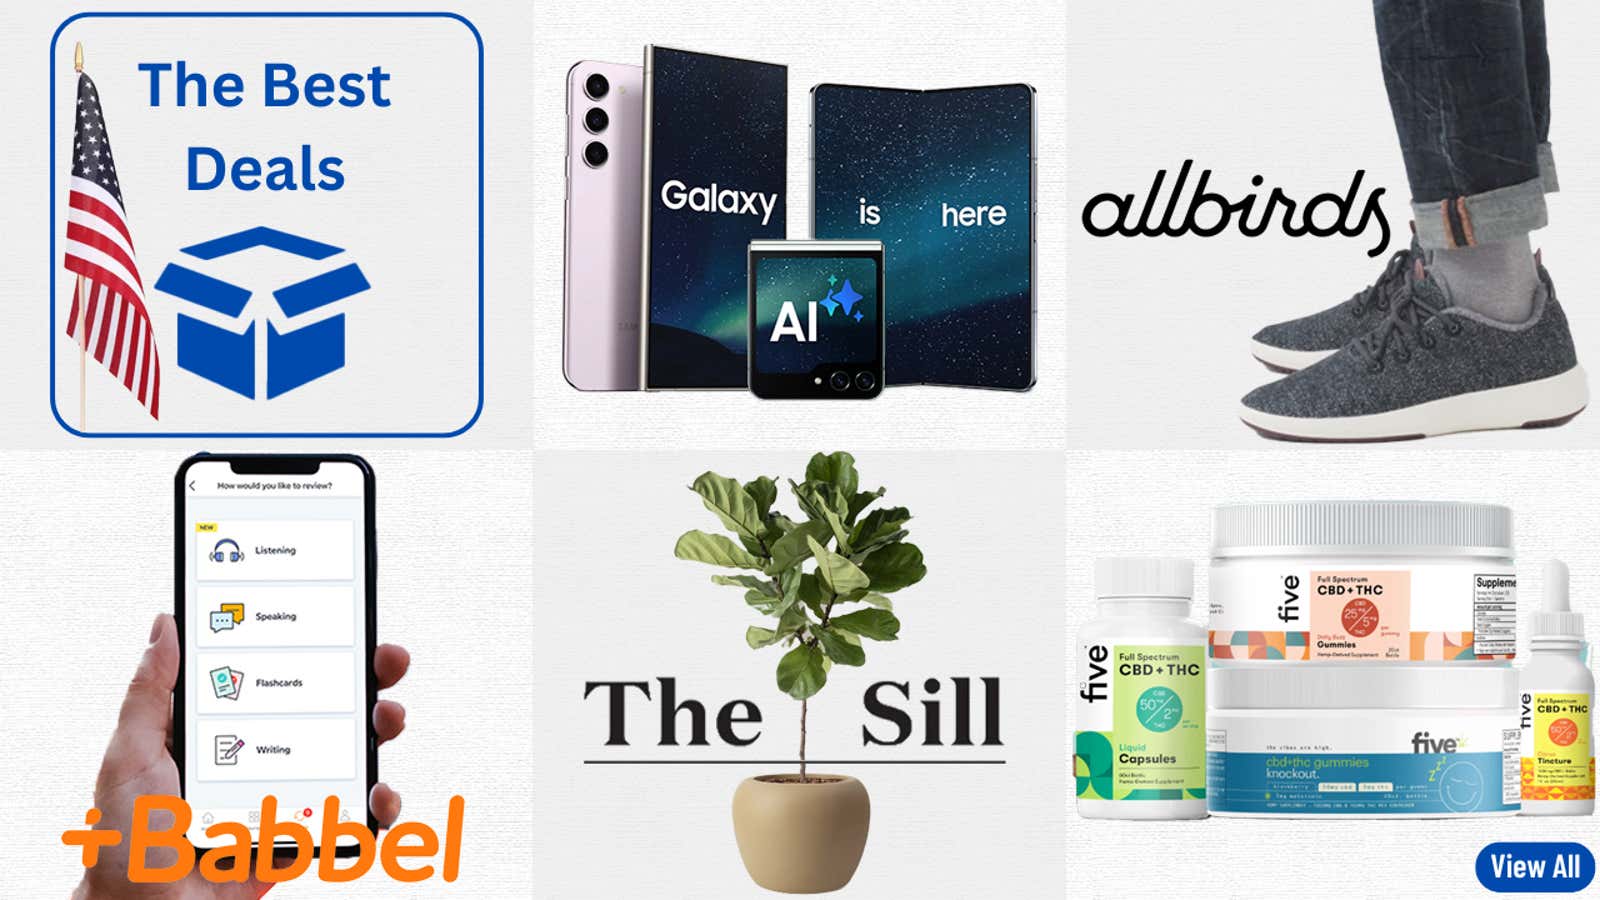 Image for Best Deals of the Day: Samsung, Allbirds, Babbel, The Sill, Five CBD & More